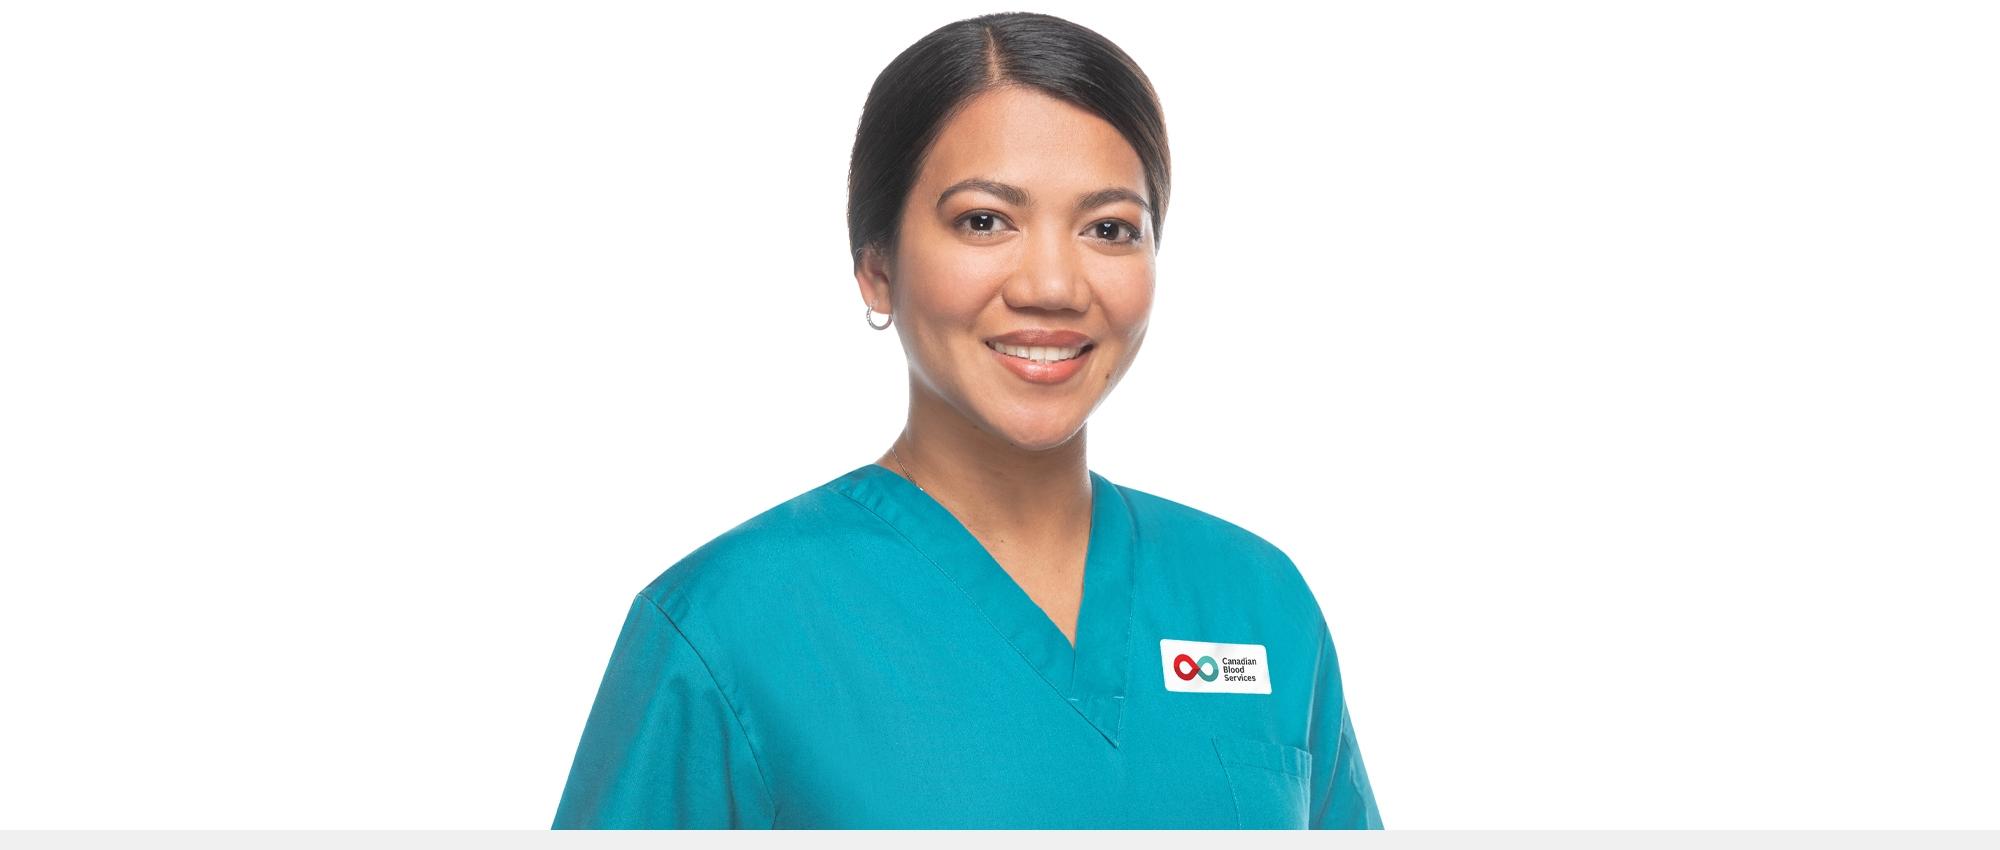 Featured image of Cord Blood Collections Specialist Janrene